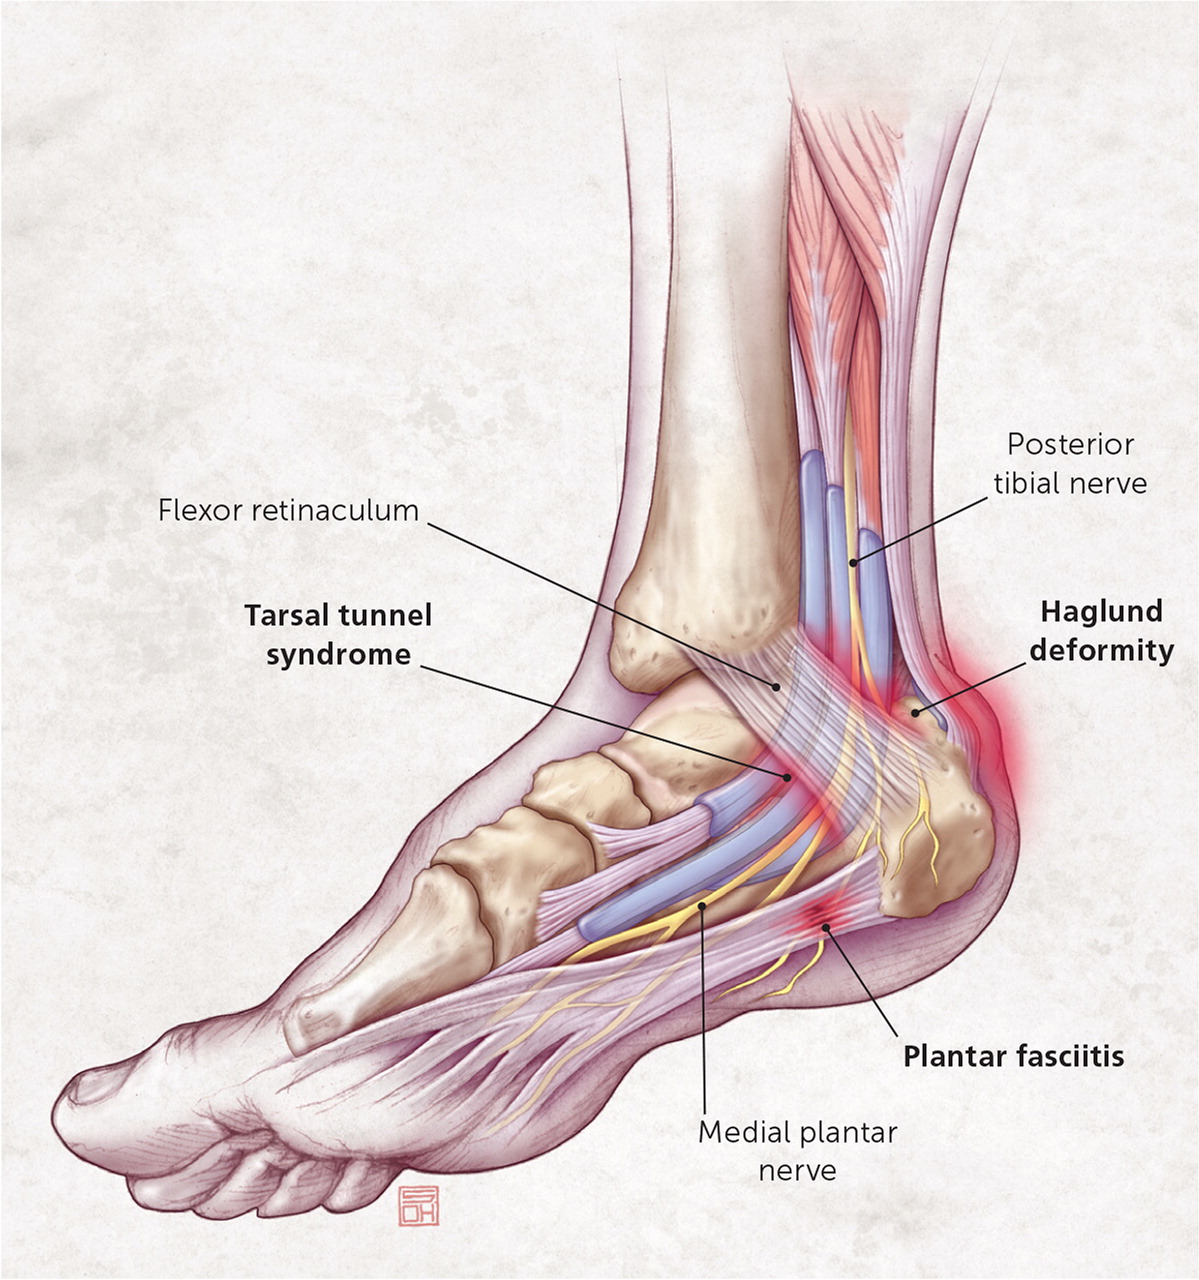 Heel pain known as 'Sever's disease' frequently affects young athletes